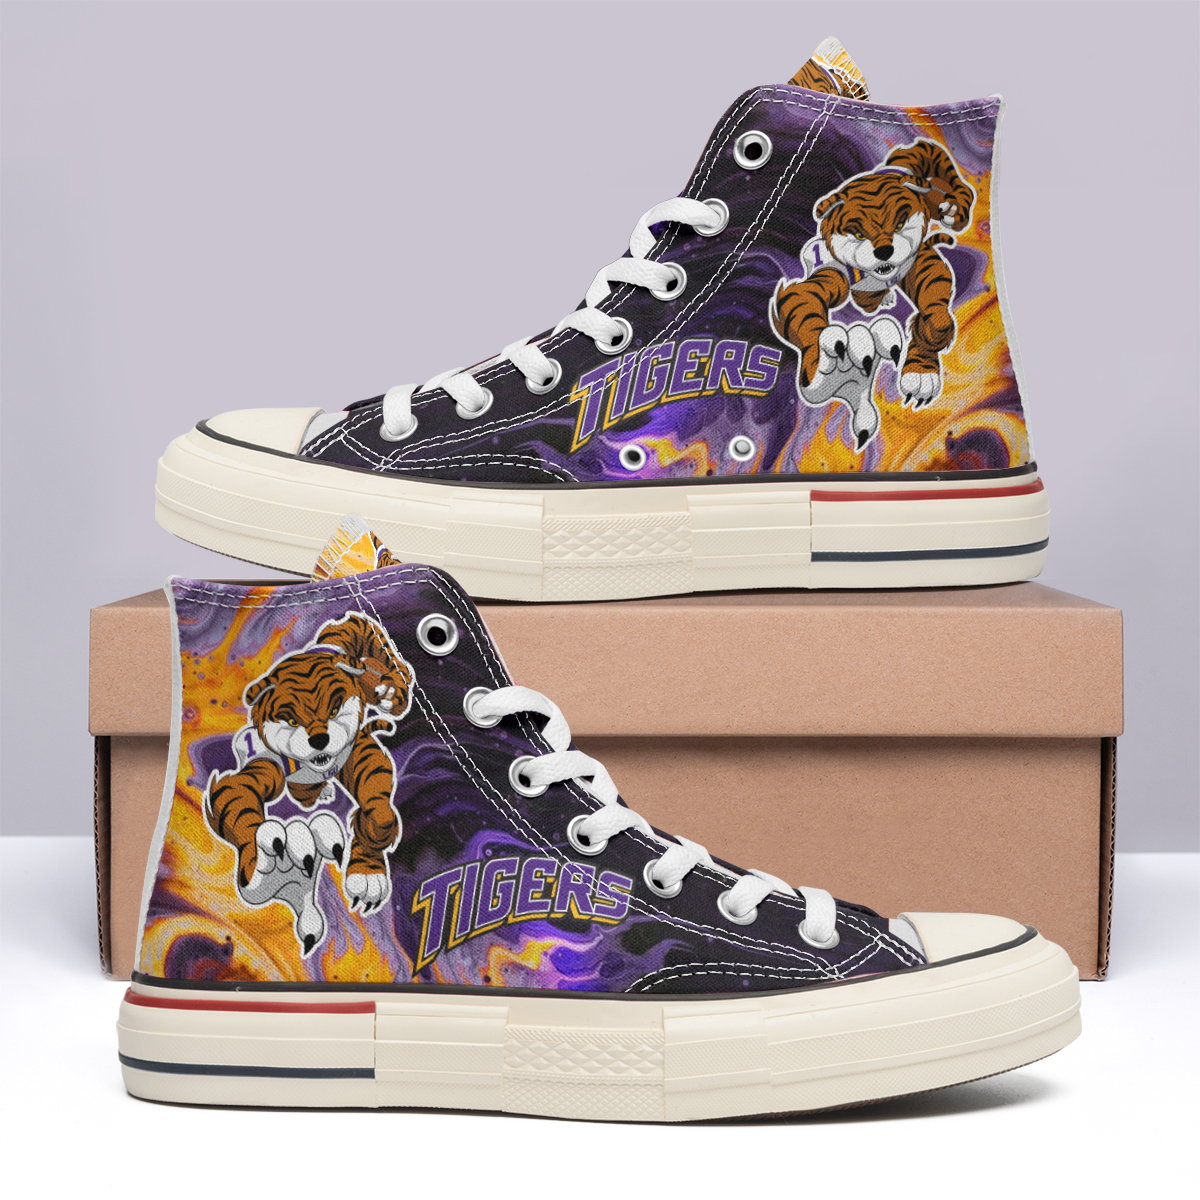 Lsu Tigers High Top Canvas Shoes Special Edition